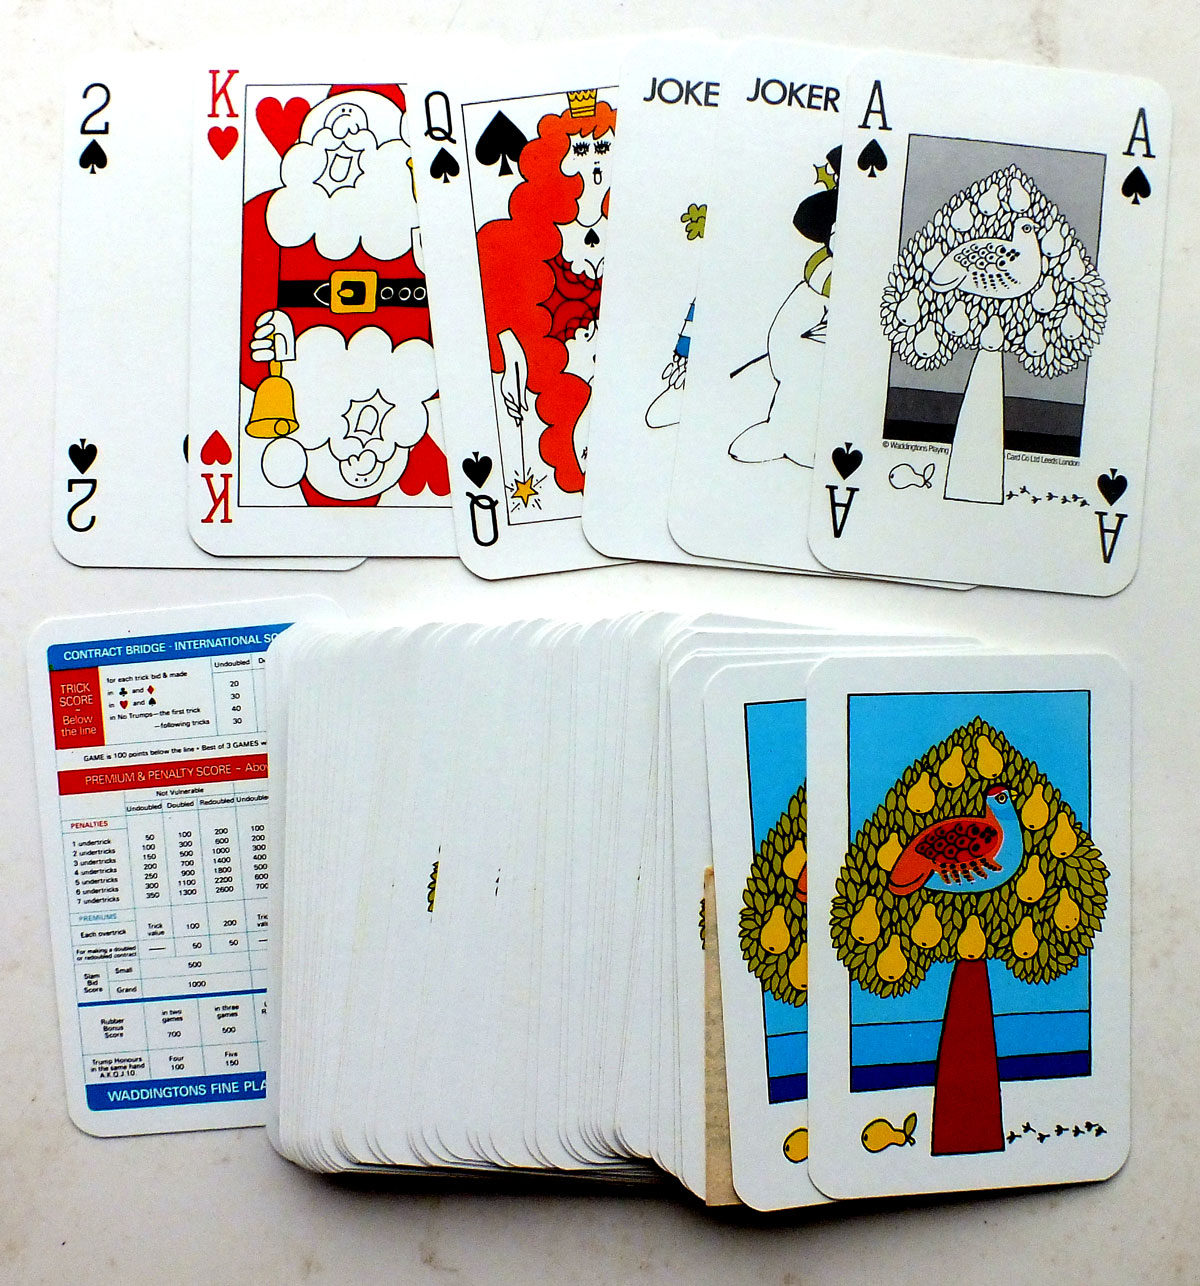 Waddington’s Playing Cards - The World of Playing Cards